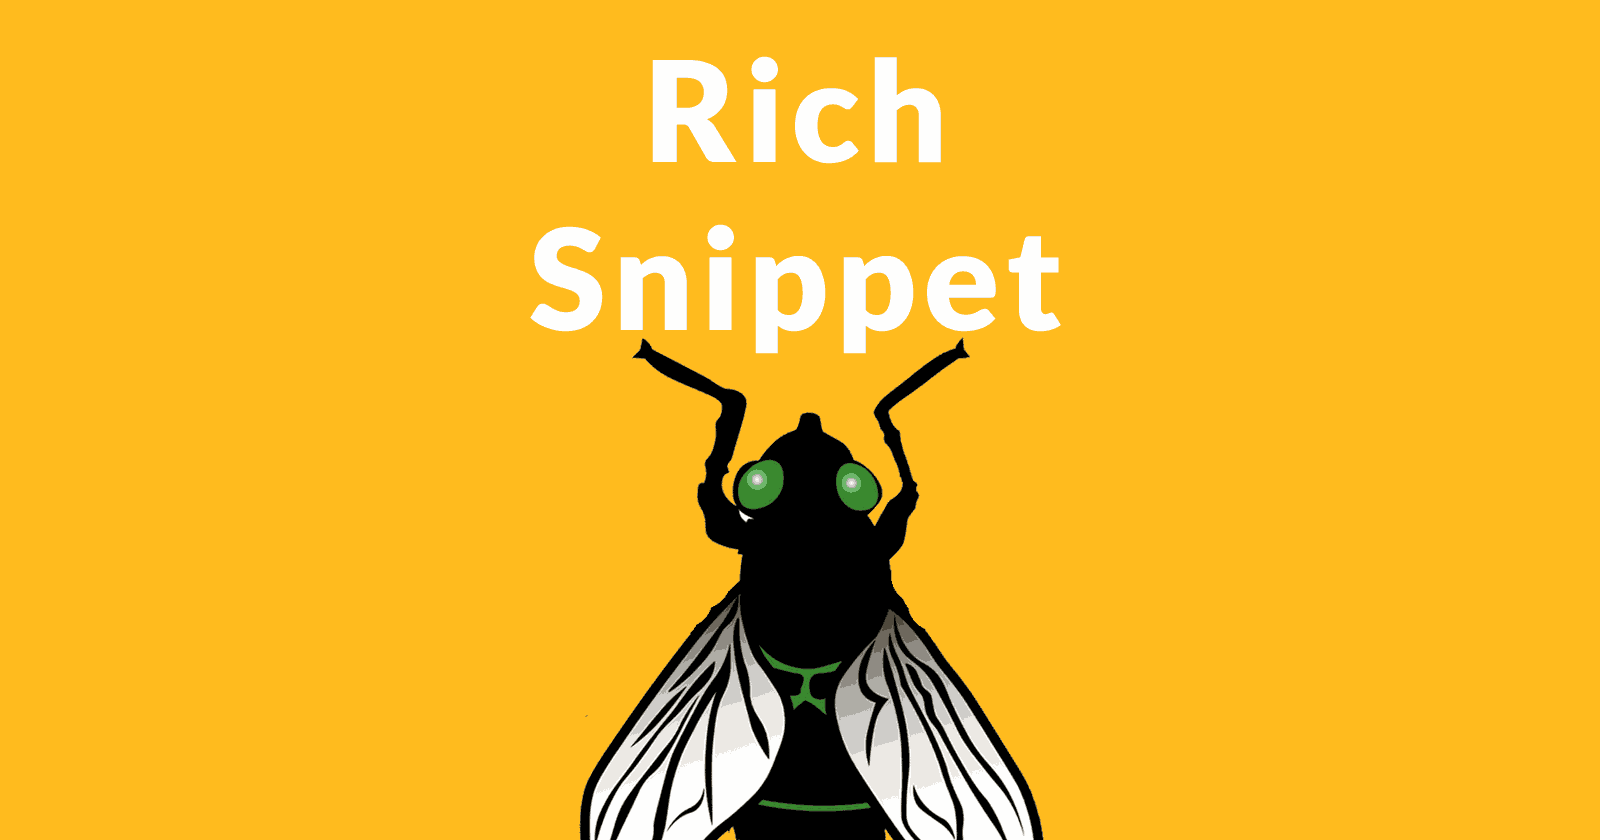 The words "Rich Snippets" over the image of a large bug